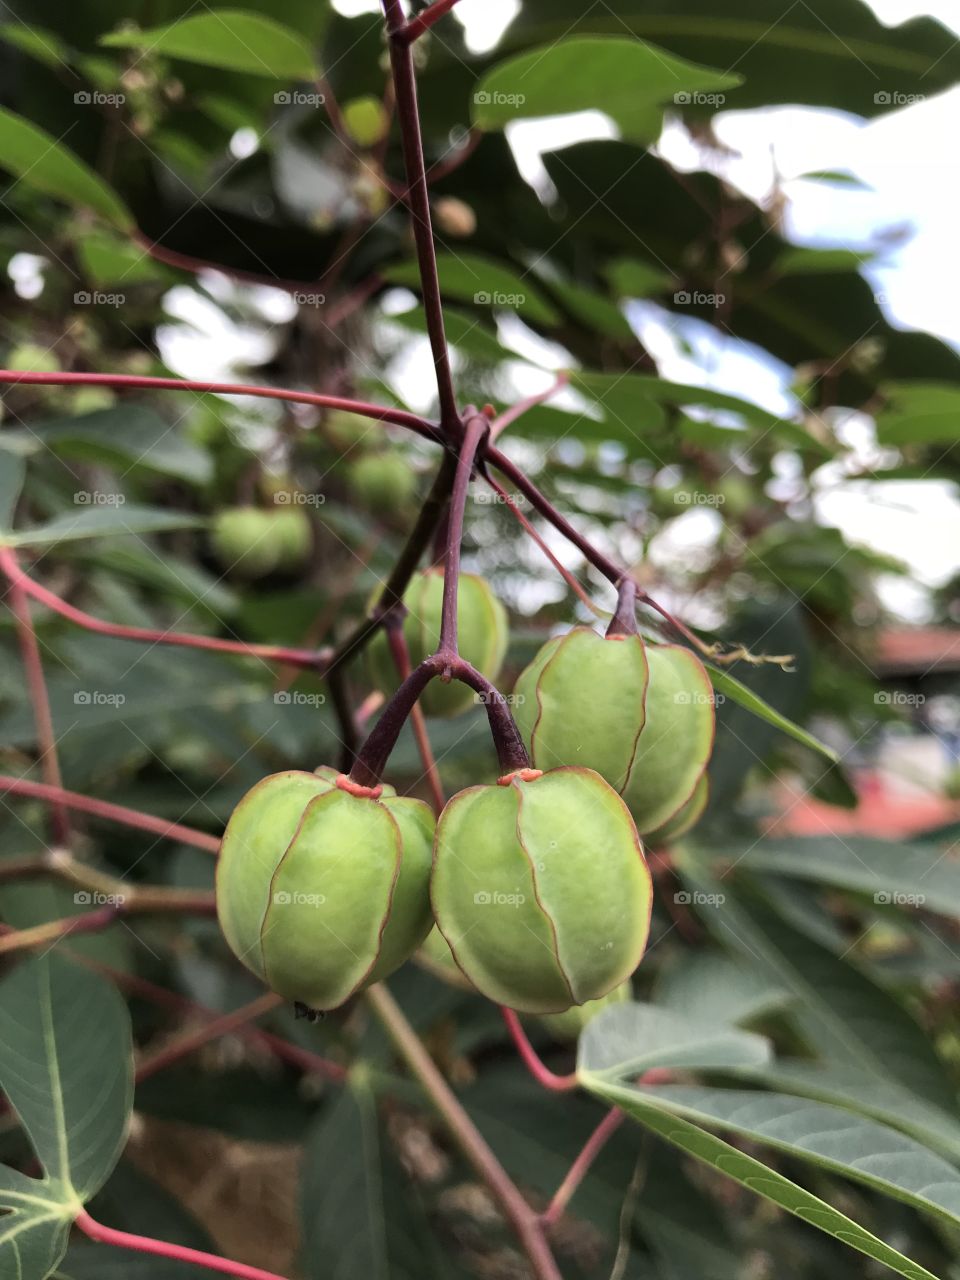 Fruit or What?